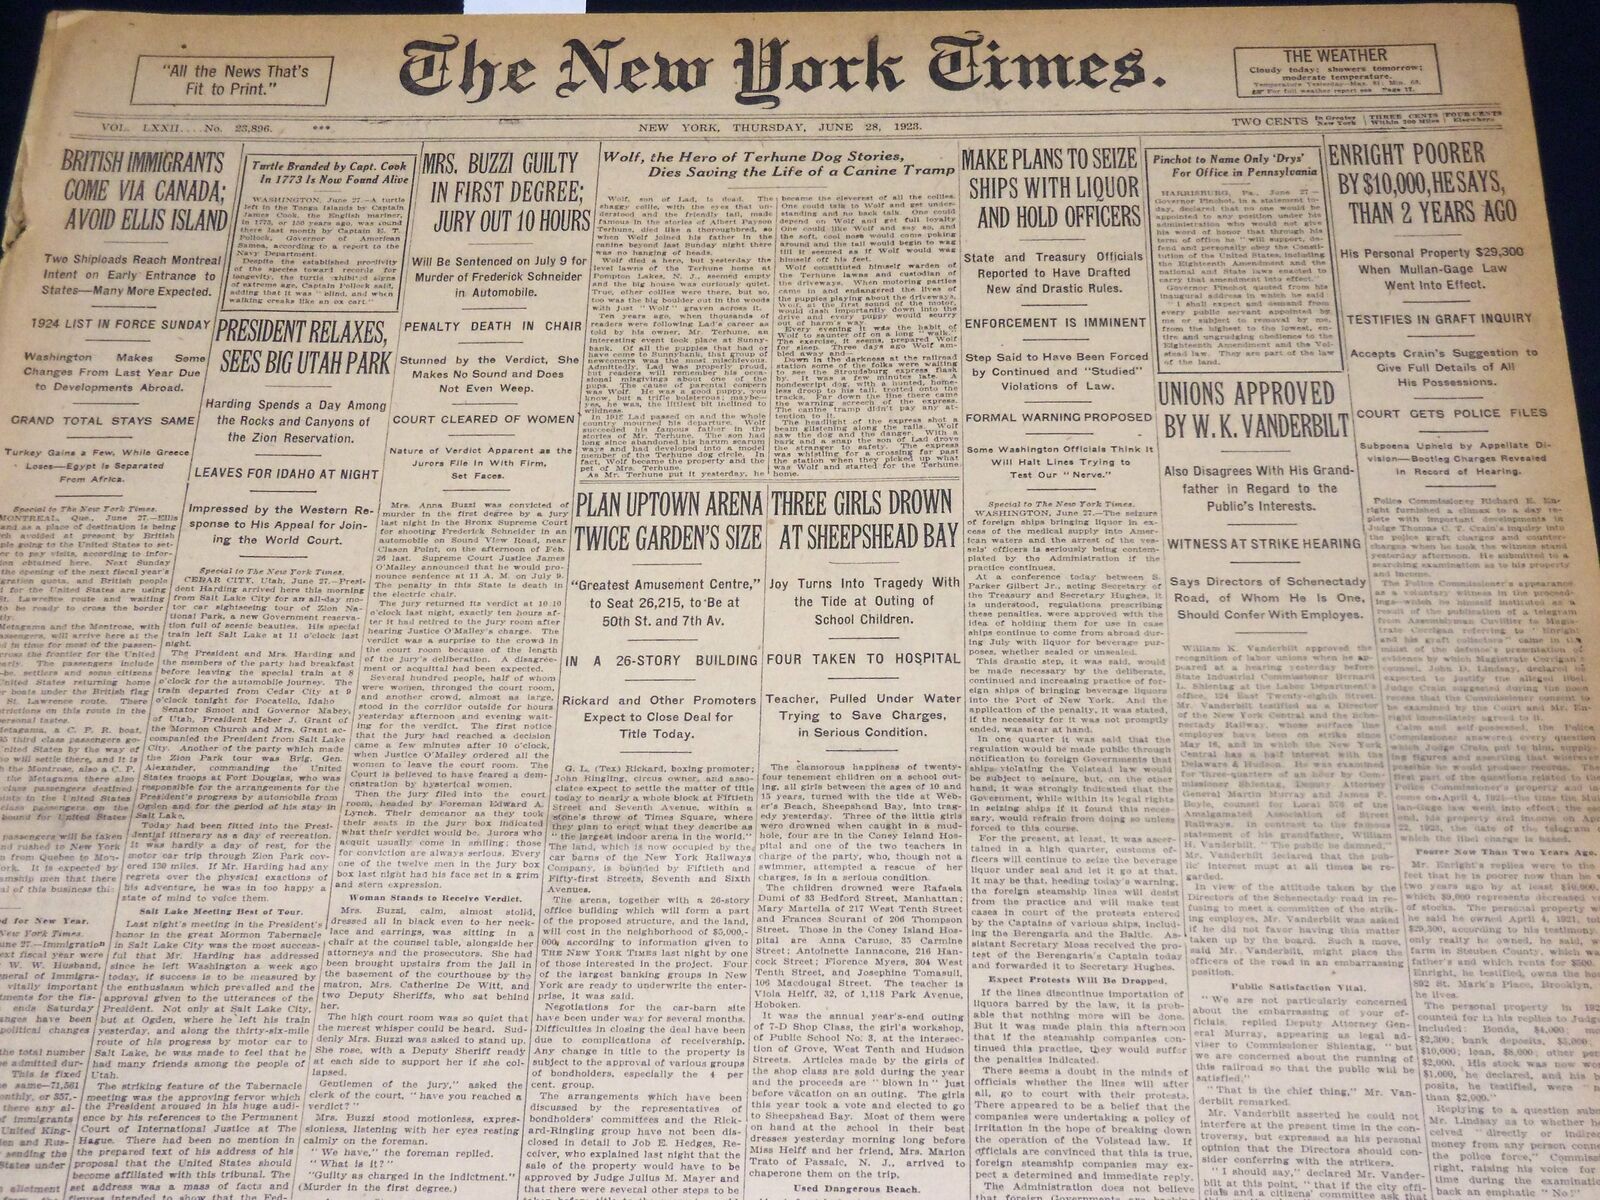 1923 JUNE 28 NEW YORK TIMES - PLAN UPTOWN ARENA TWICE GARDENS SIZE - NT 8723